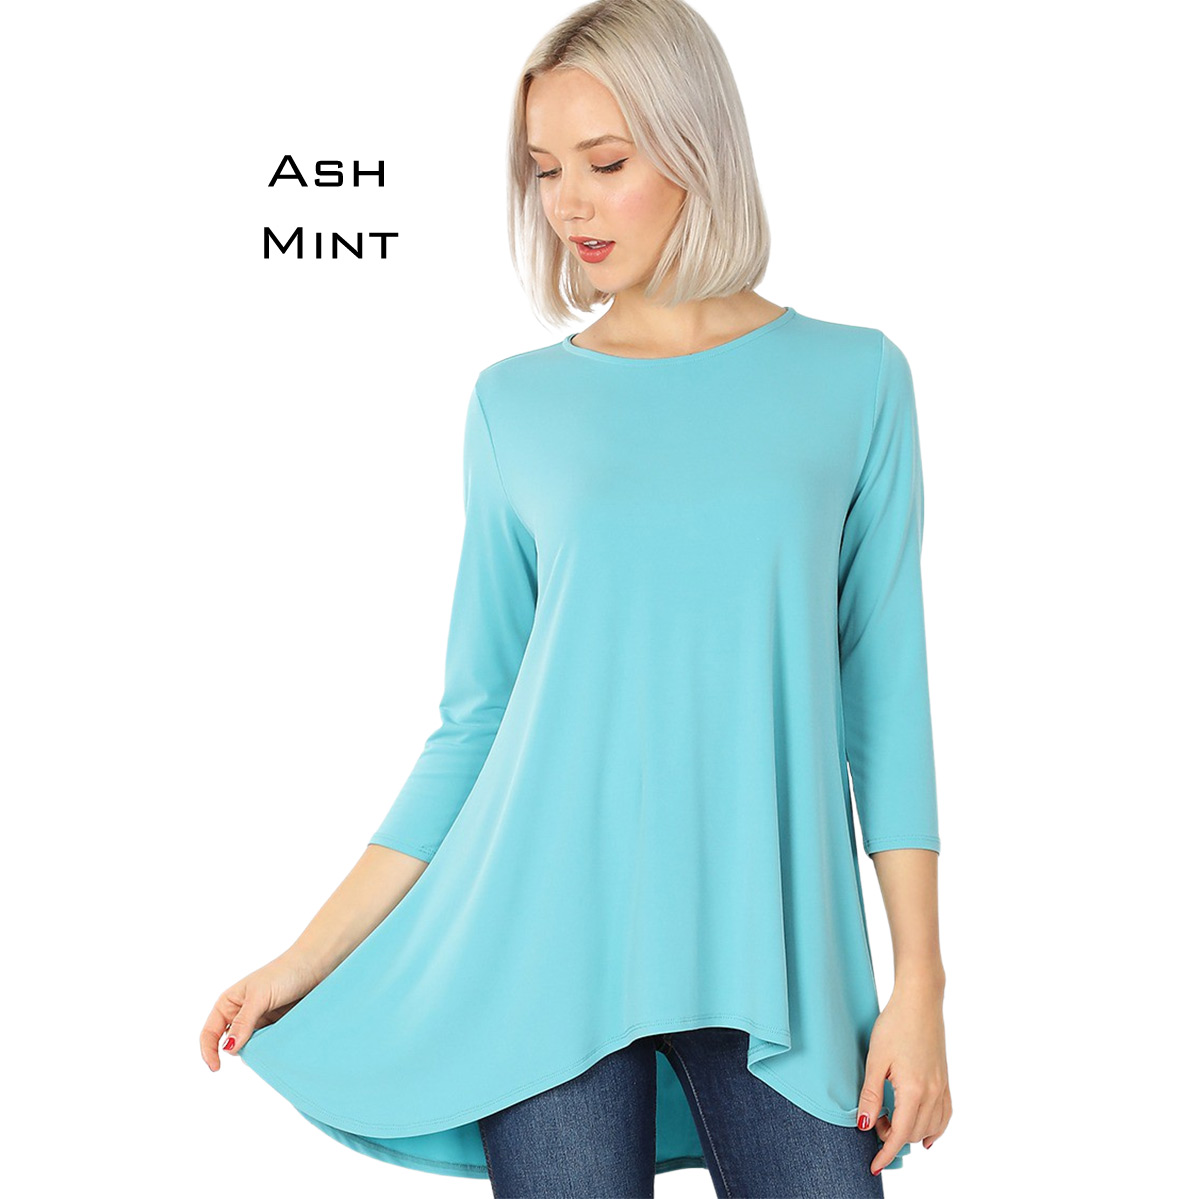 ASH MINT High-Low 3/4 Sleeve Top 2367